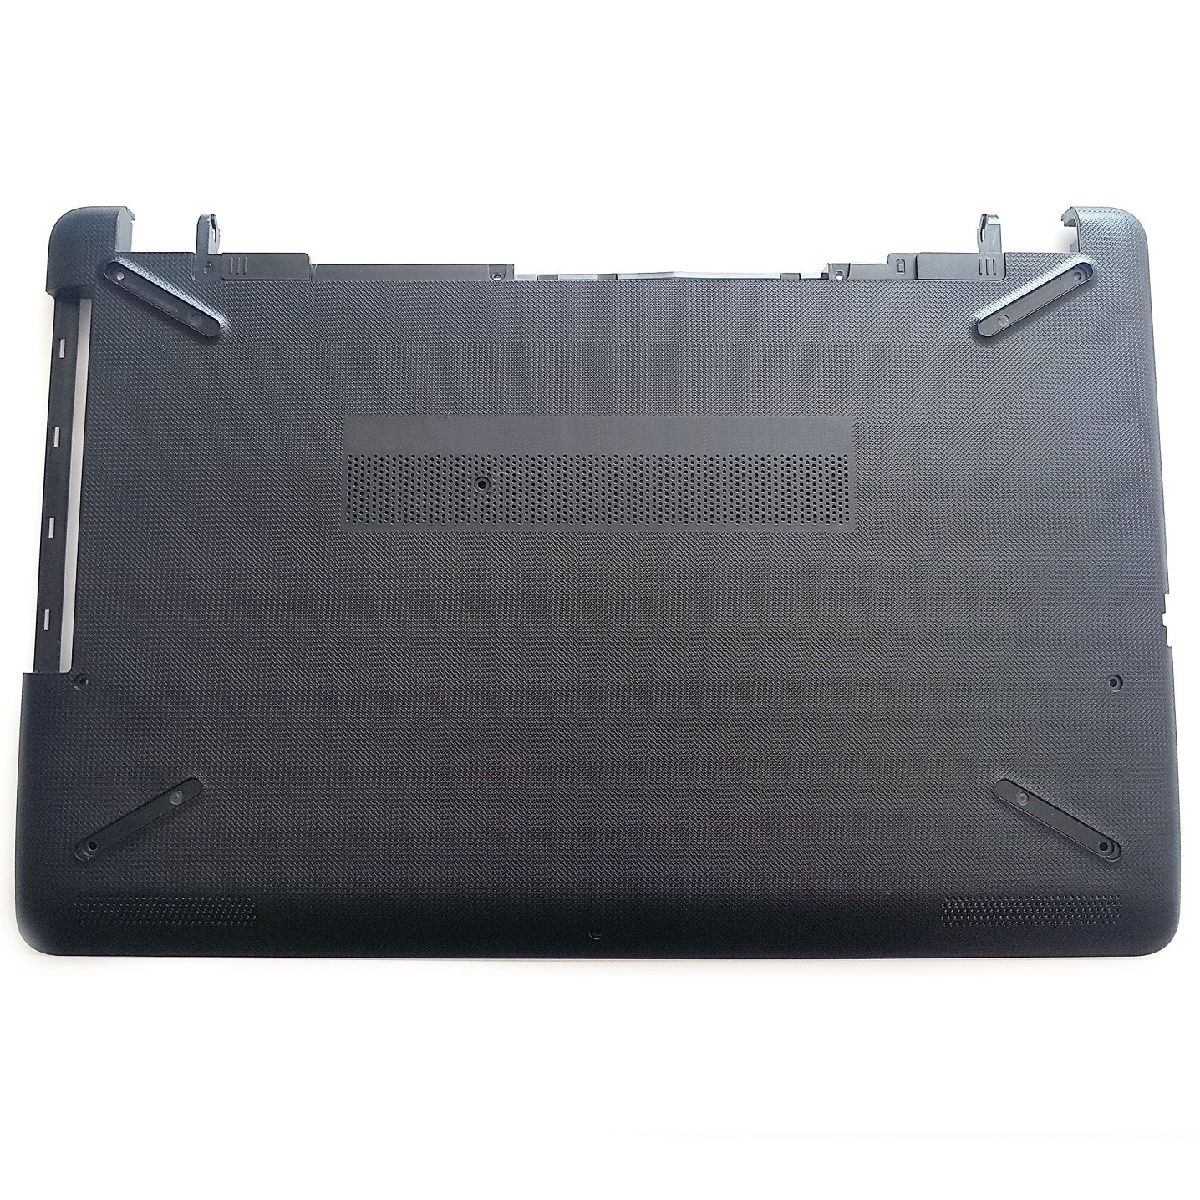 Hp 15-BW017NT, 15-BW018NT, 15-BW019NT, 15-BW020NT, 15-BW021NT, 15-BW022NT Uyumlu Alt Kasa D Cover